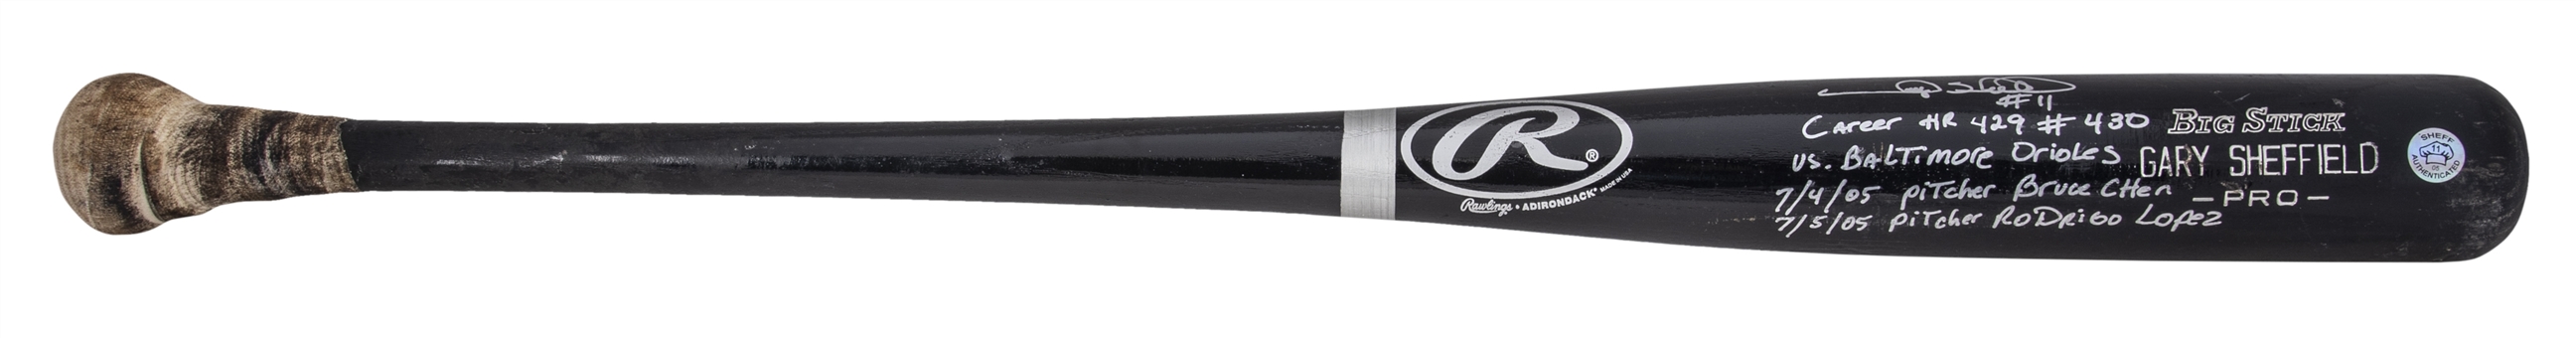 2005 Gary Sheffield Game Used, Signed & Inscribed Rawlings 170B Model Bat Used to Hit Career HR #s 429 & 430 (PSA/DNA)